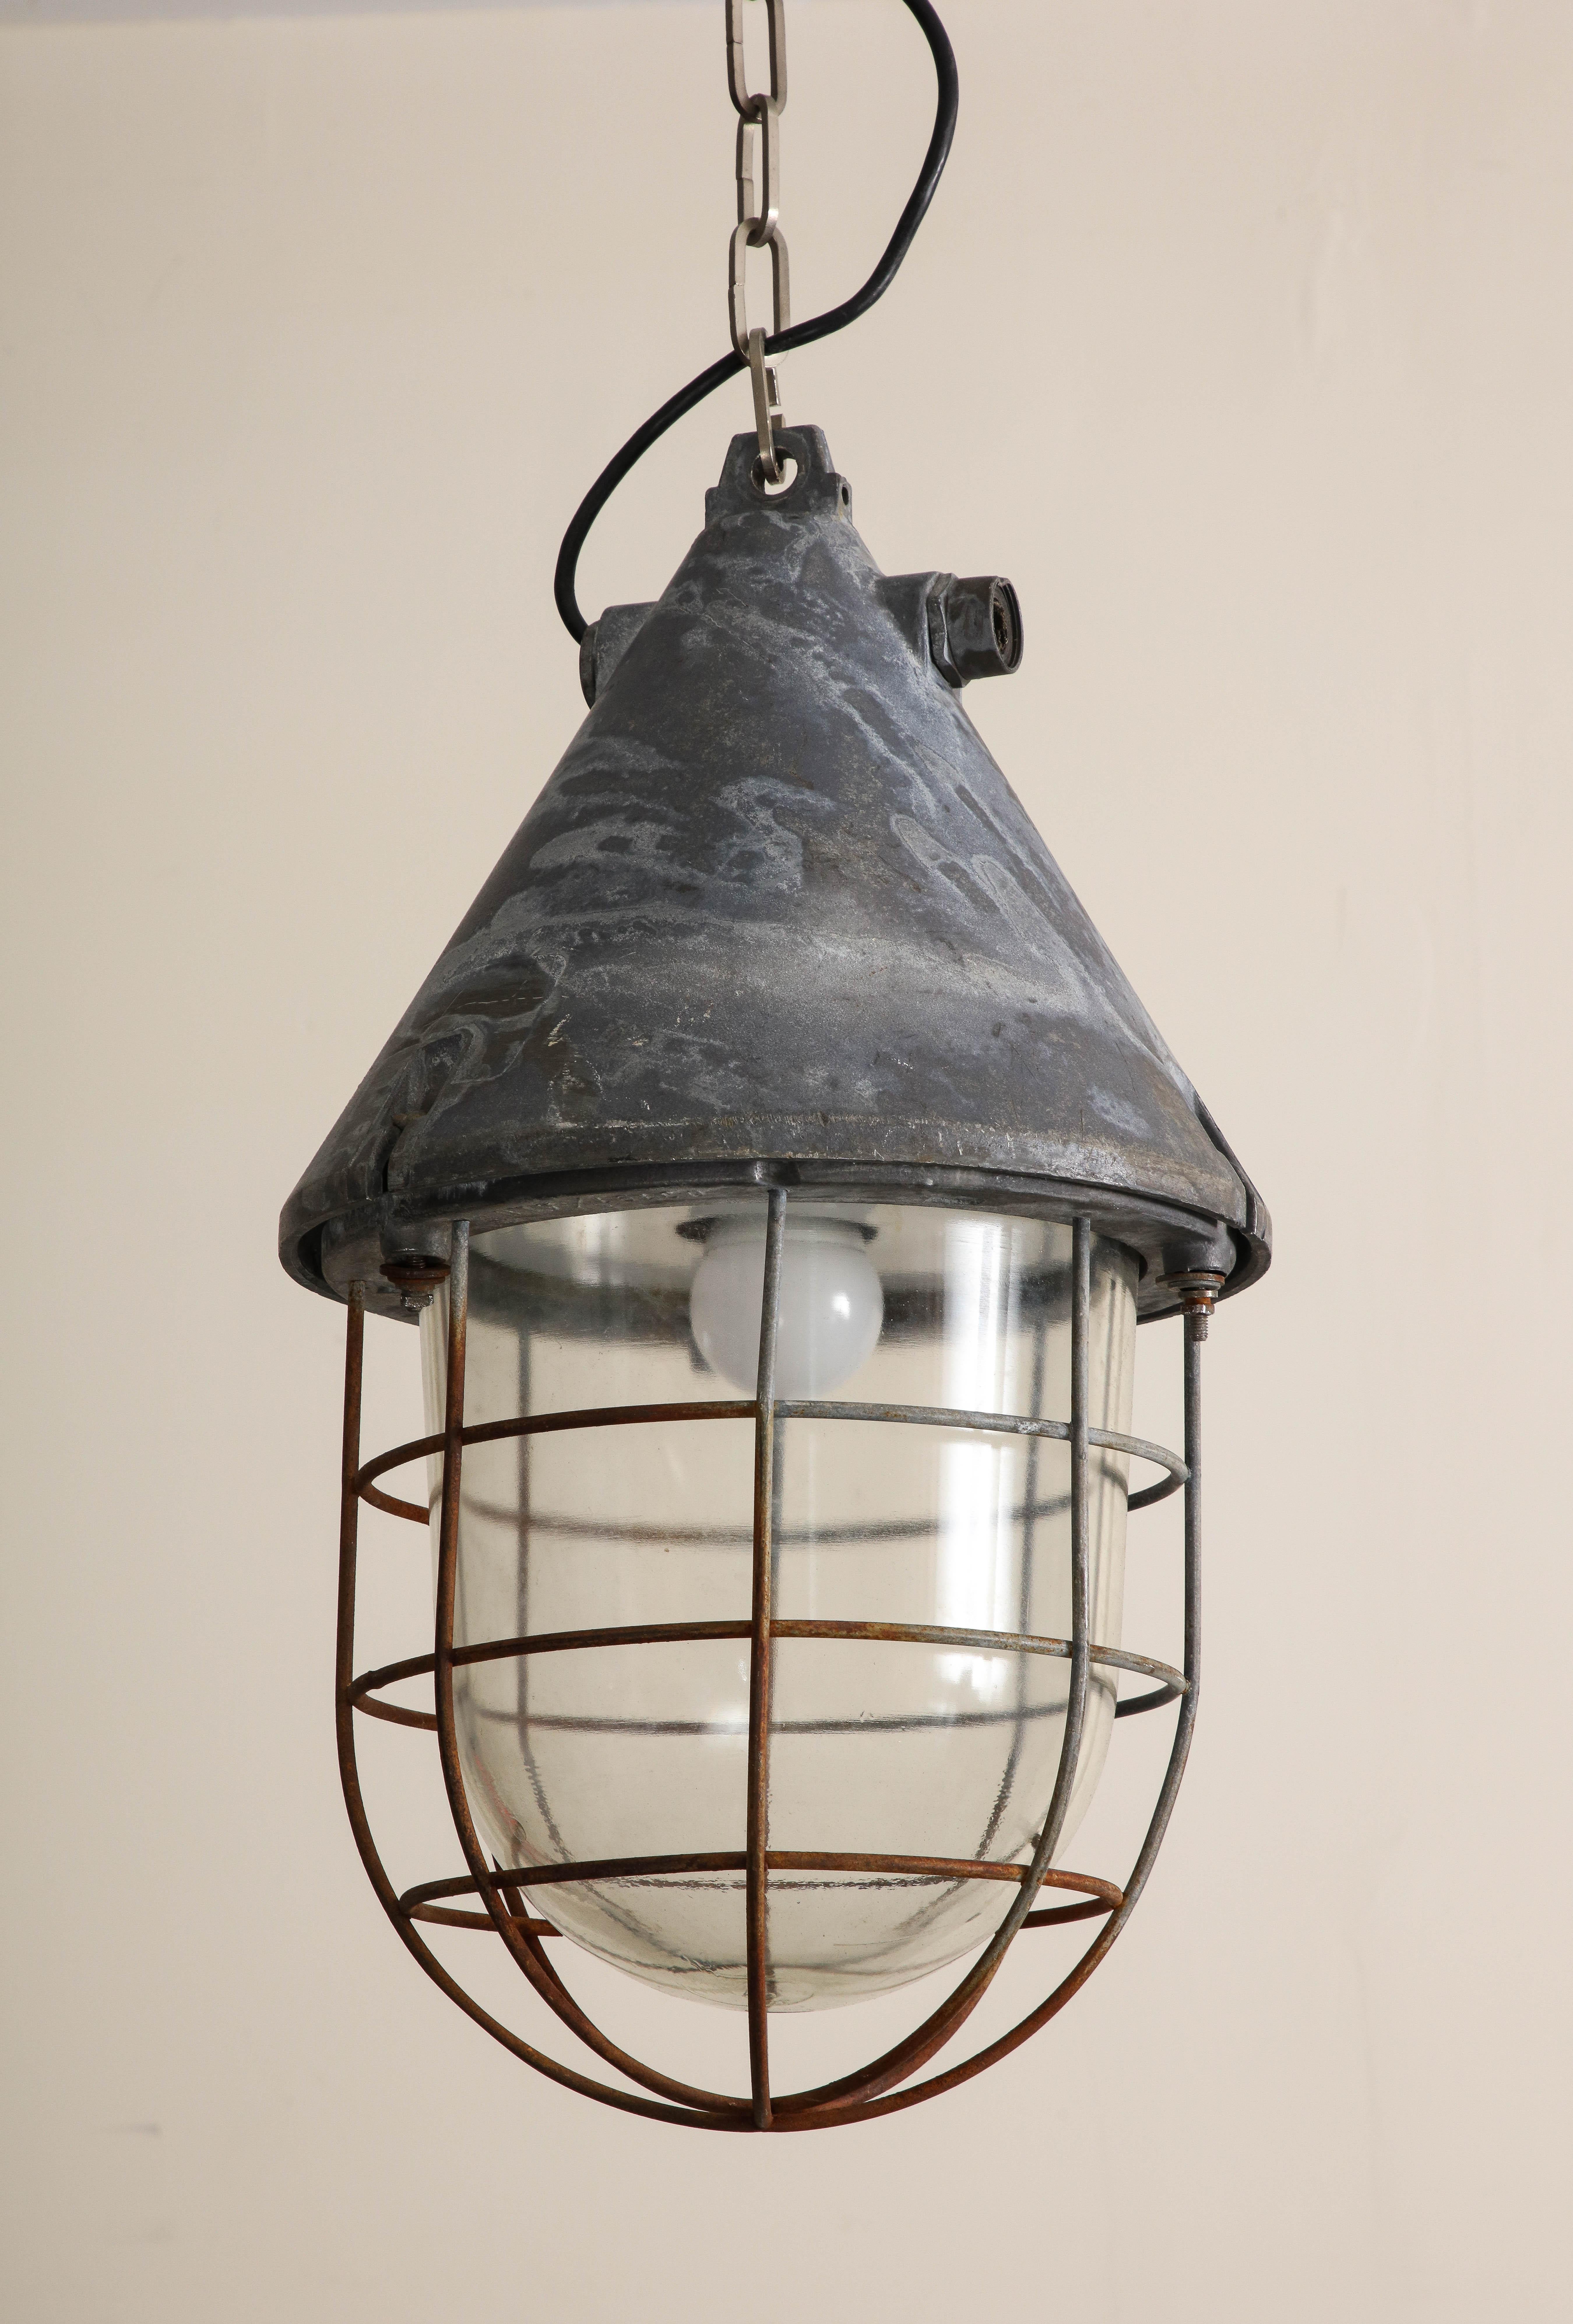 Pair of Vintage Industrial Cast Iron Cage Pendant Lights, C. 1920 For Sale 3